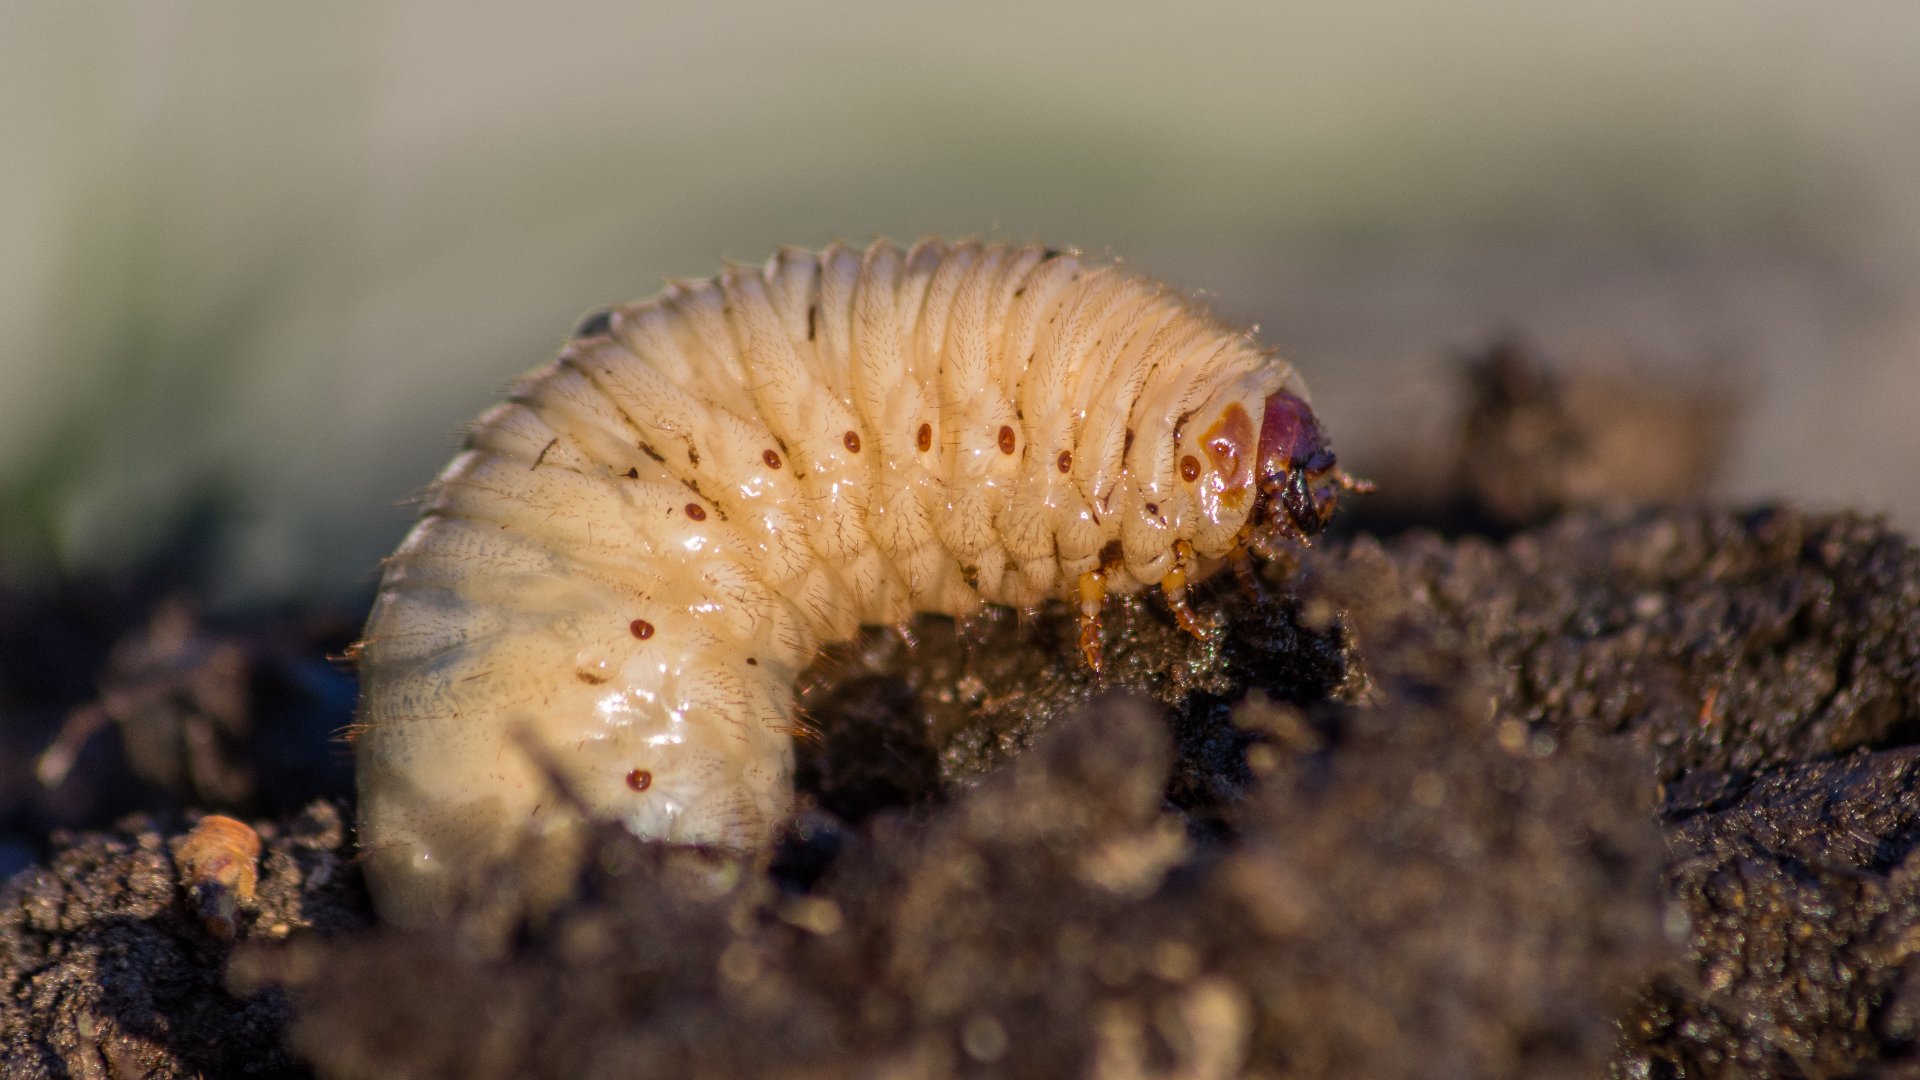 How Can You Stop Grubs From Damaging Your Lawn?